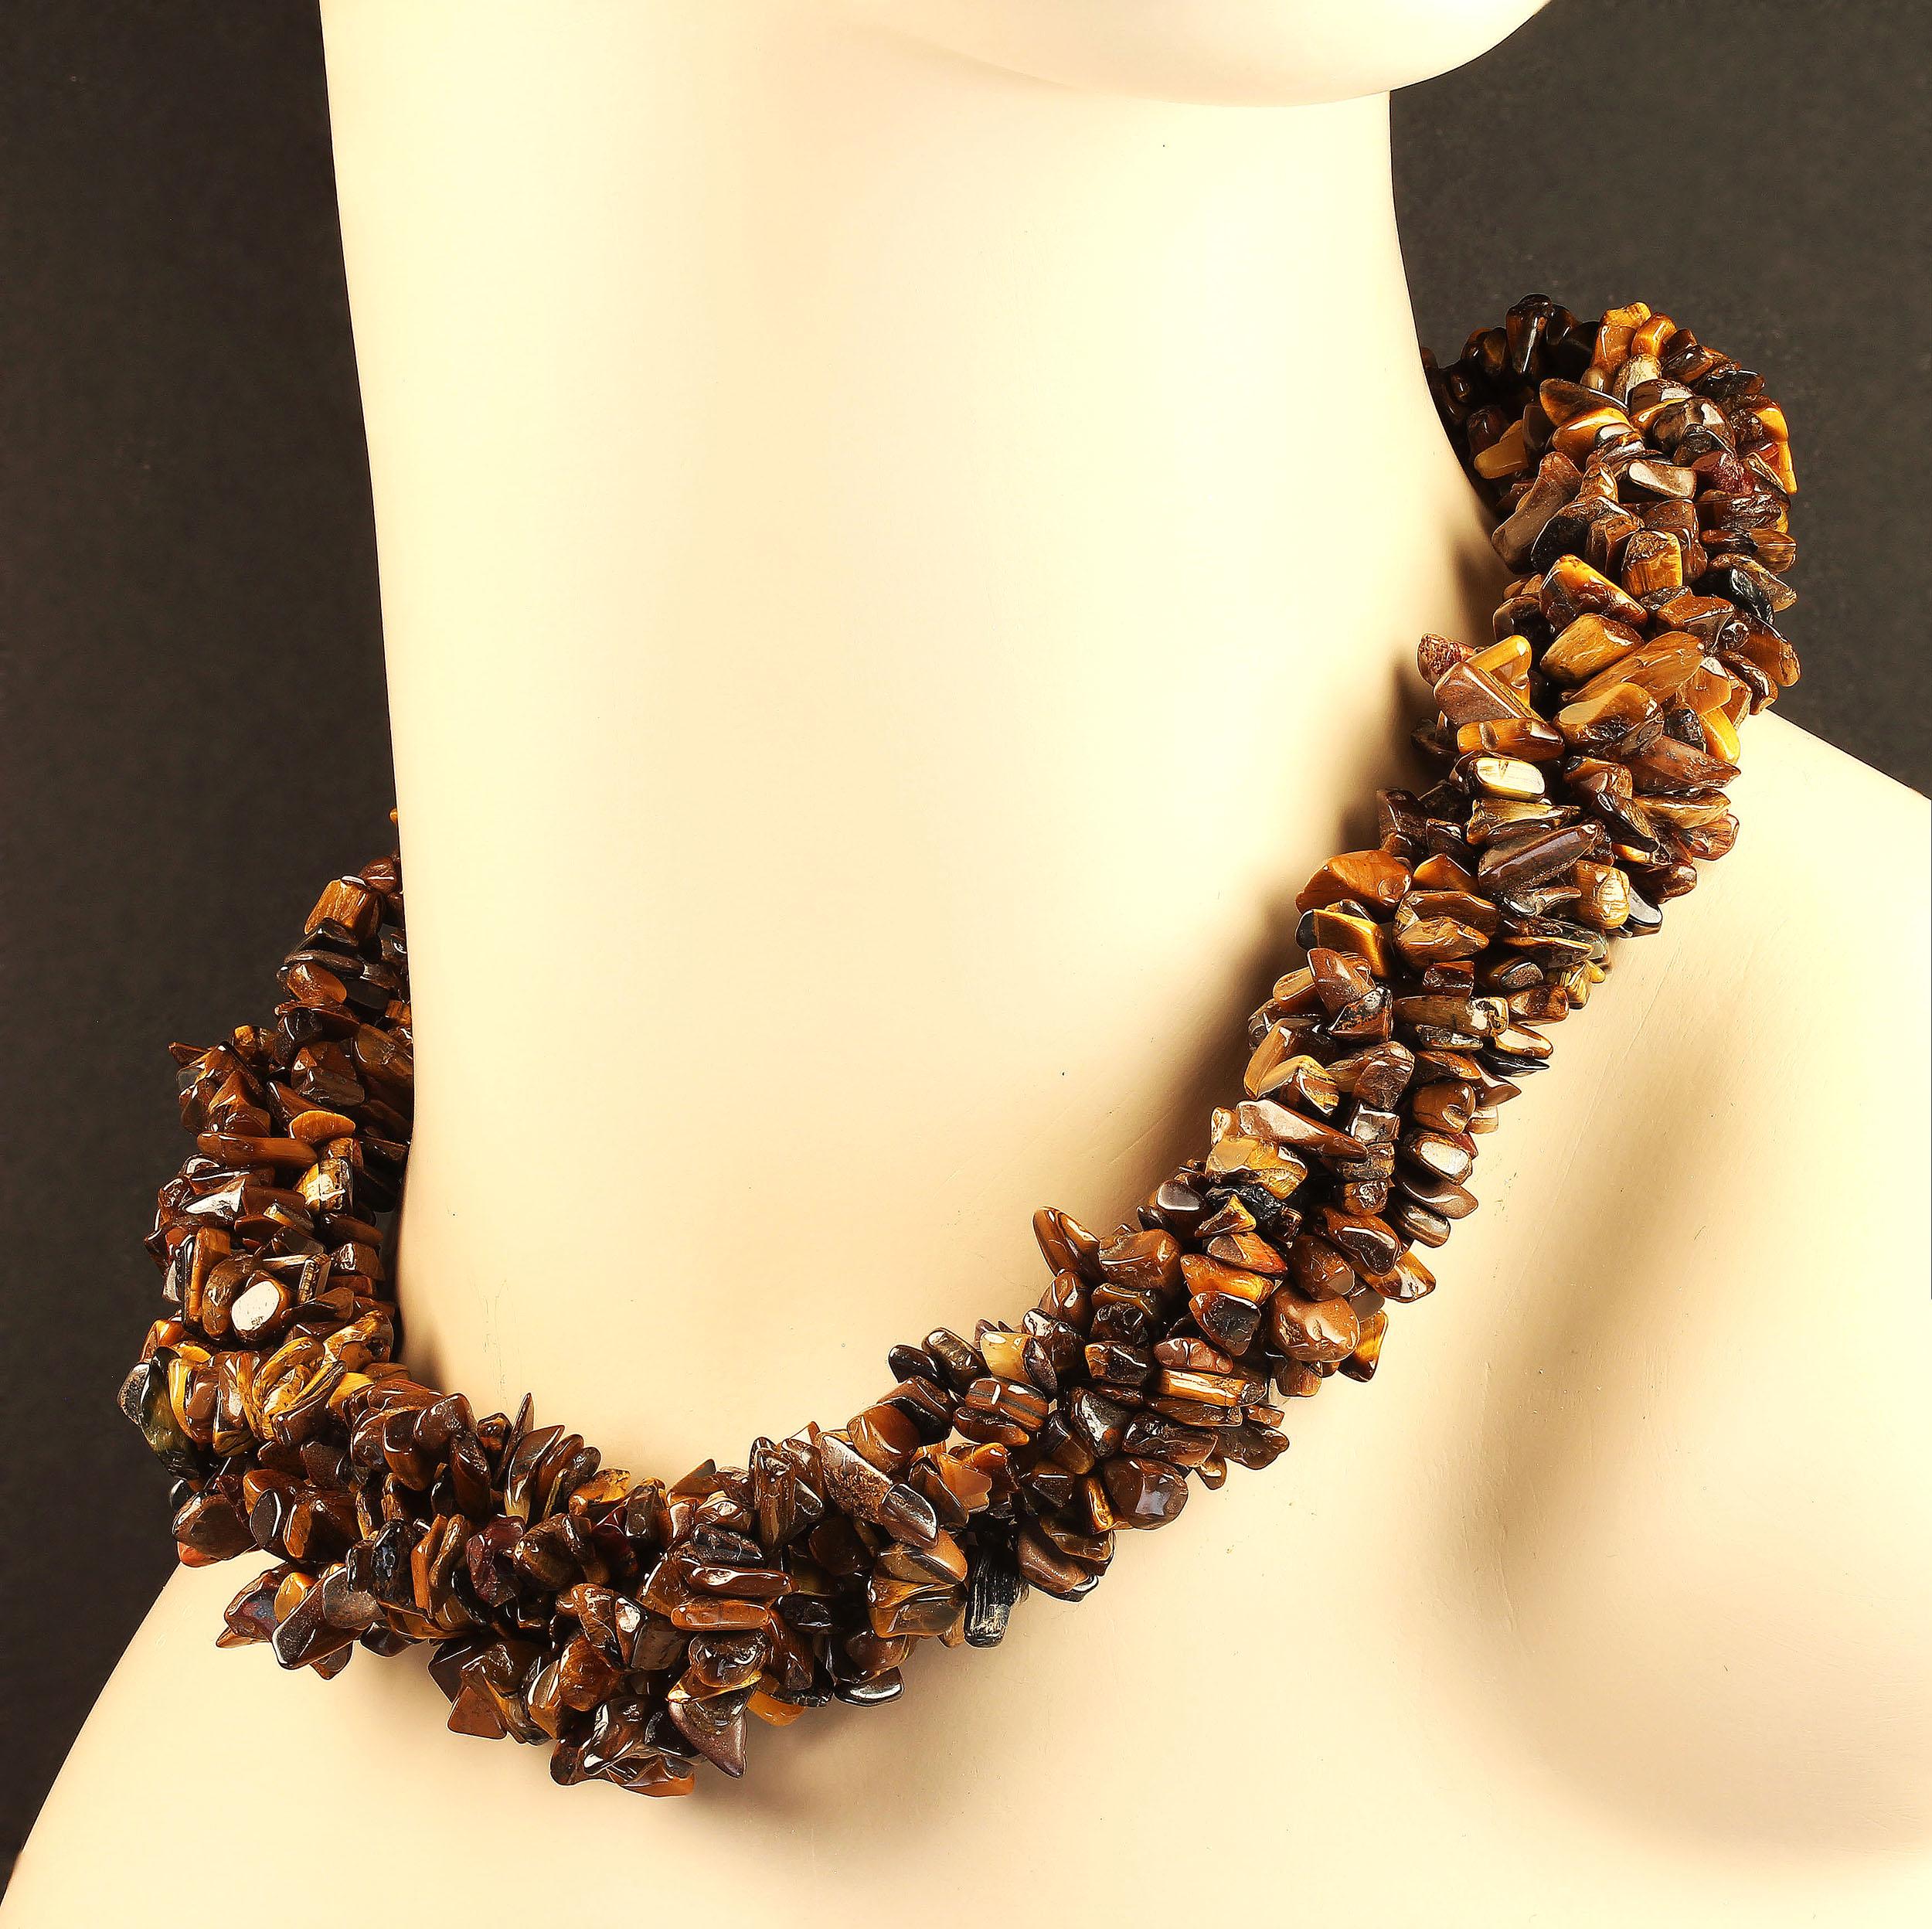 Three 36 inch infinity necklaces of chatoyant Tiger's Eye.  These wonderfully versatile necklaces can be worn long or twisted for a shortened more elegant tailored look.  Tiger's Eye is a form of chatoyant quartz.  This brown Tiger's Eye is highly